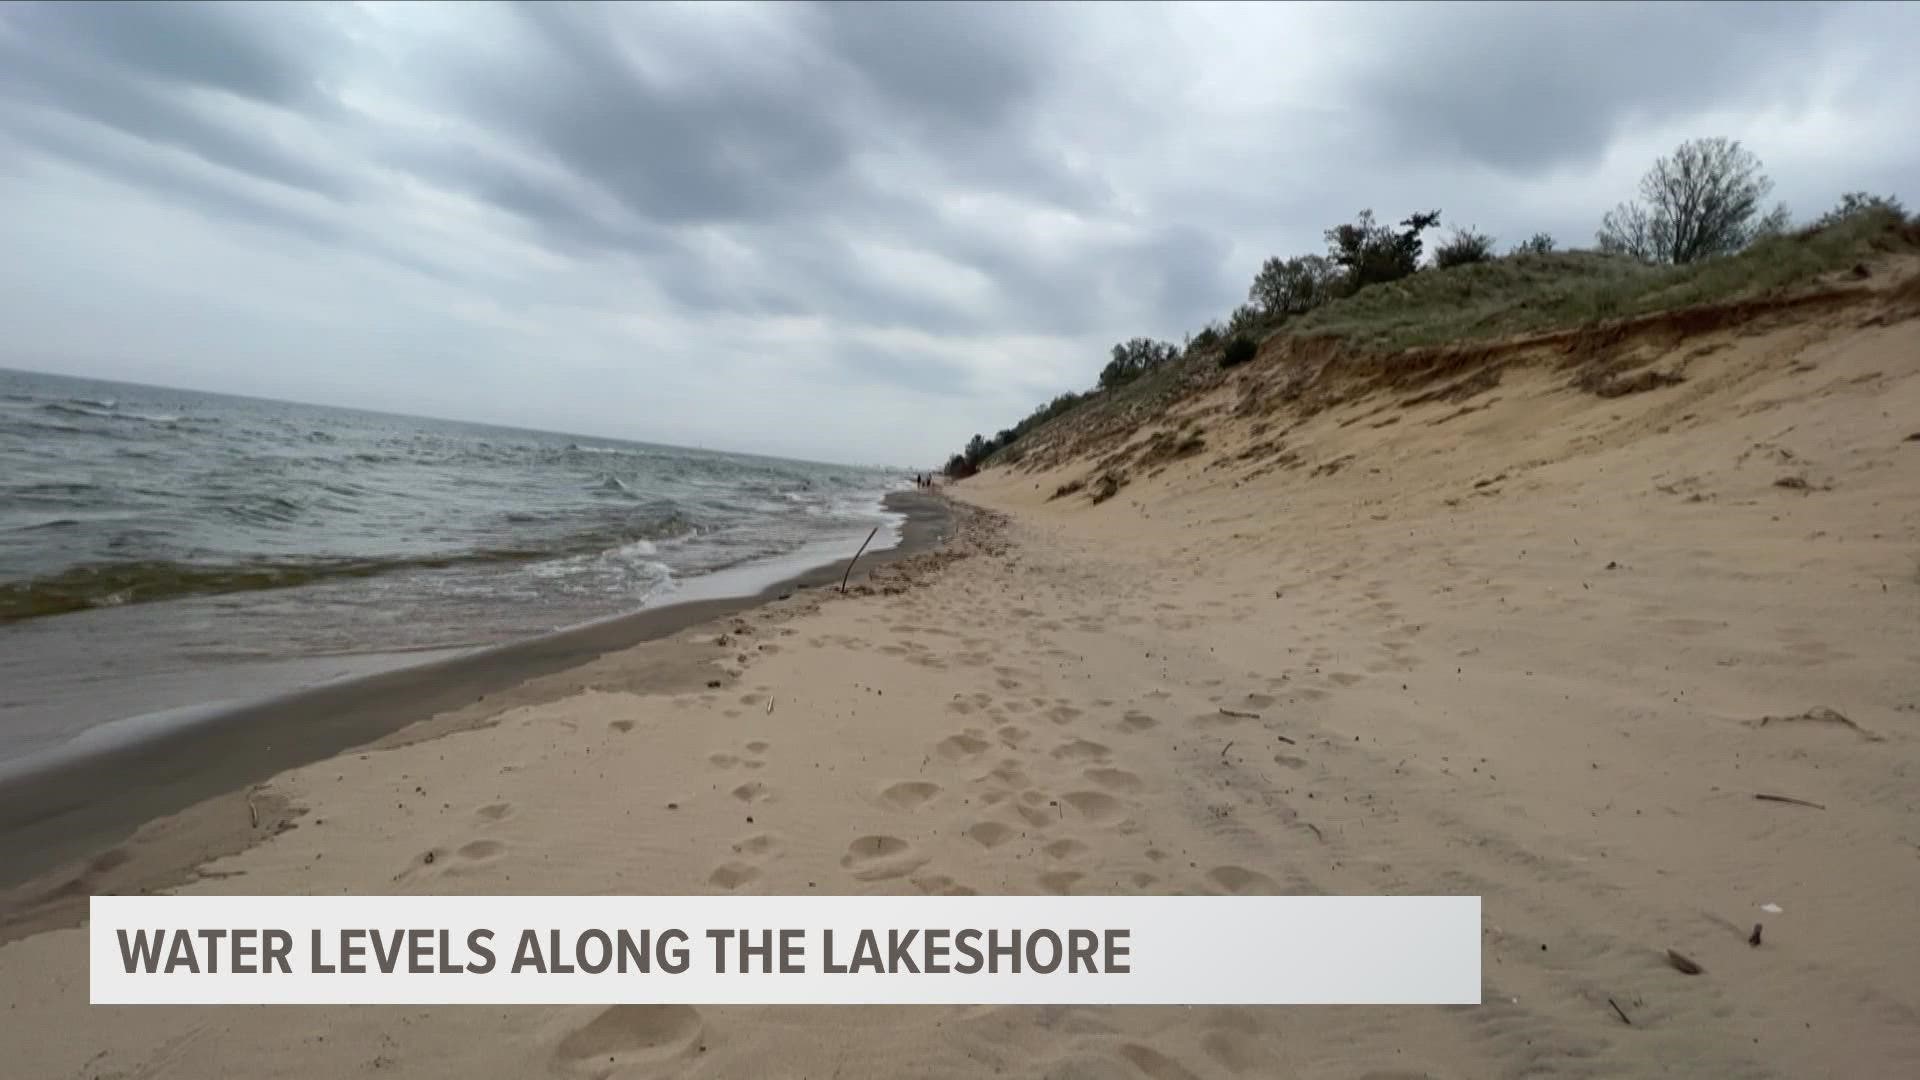 Water levels the rest of 2022 are expected to remain below record highs, but increasing variability furthers concern of extreme erosion at the lakeshore.